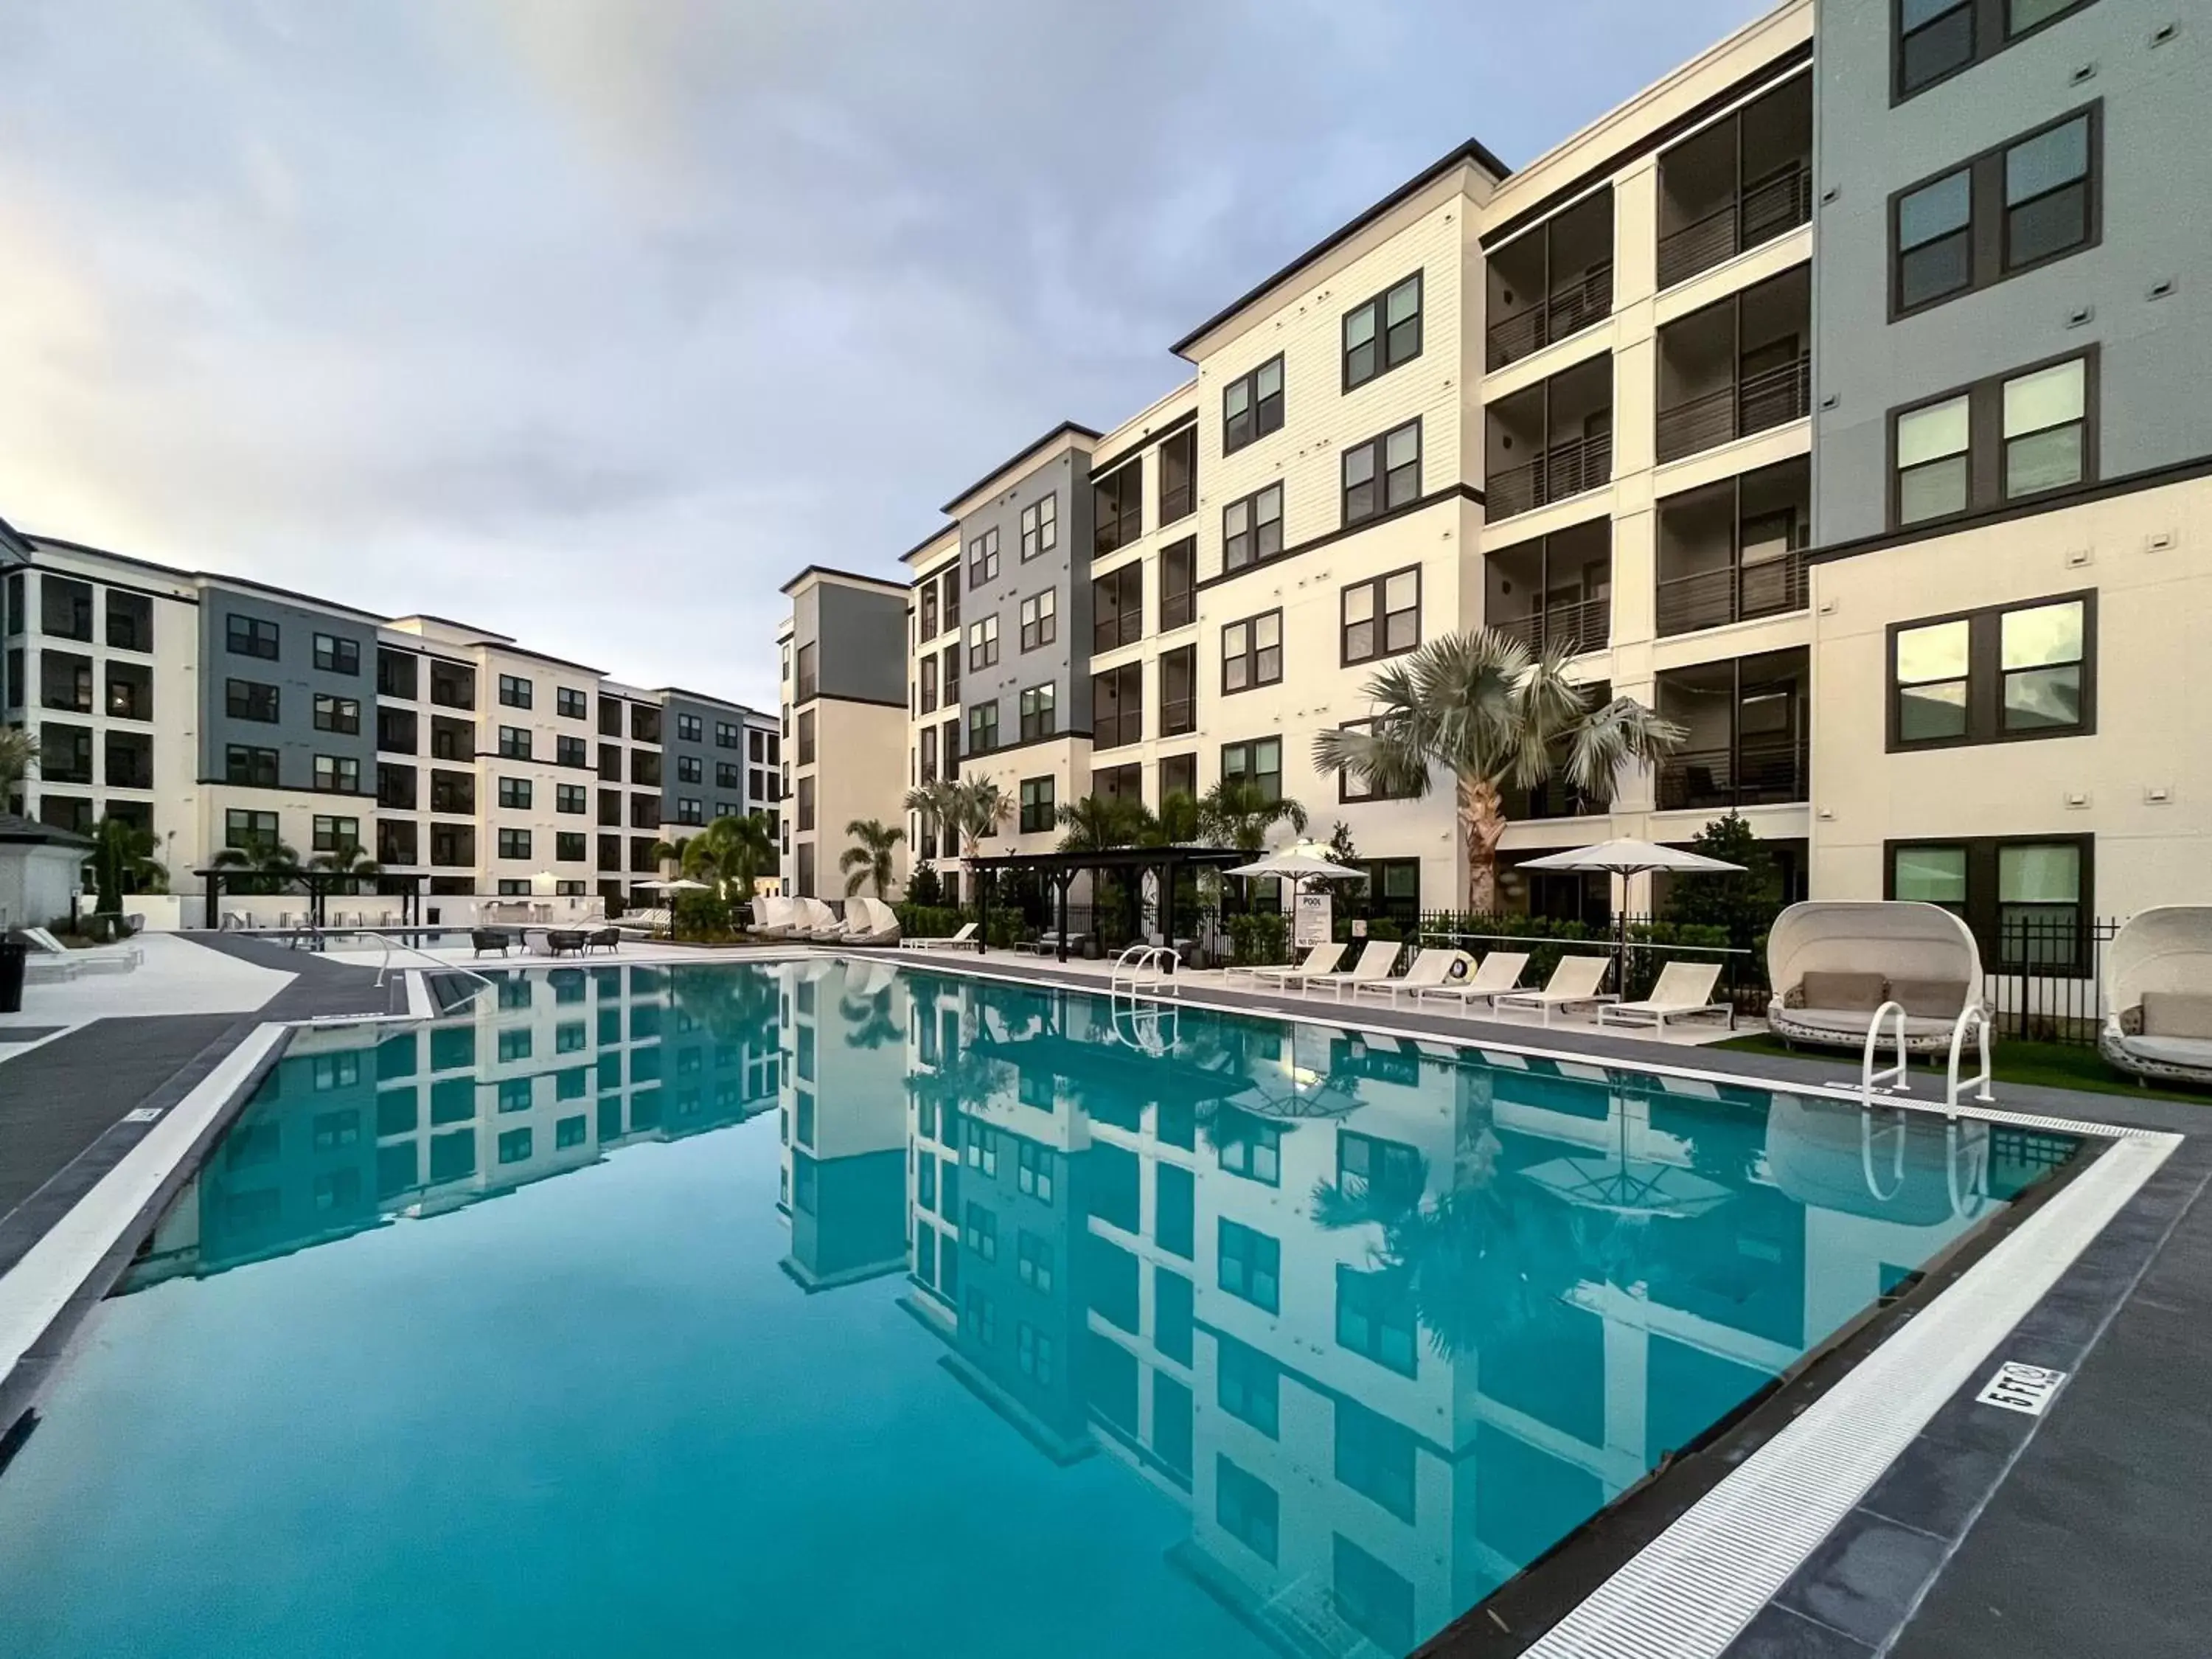 Swimming Pool in Westshore Apartments by Barsala